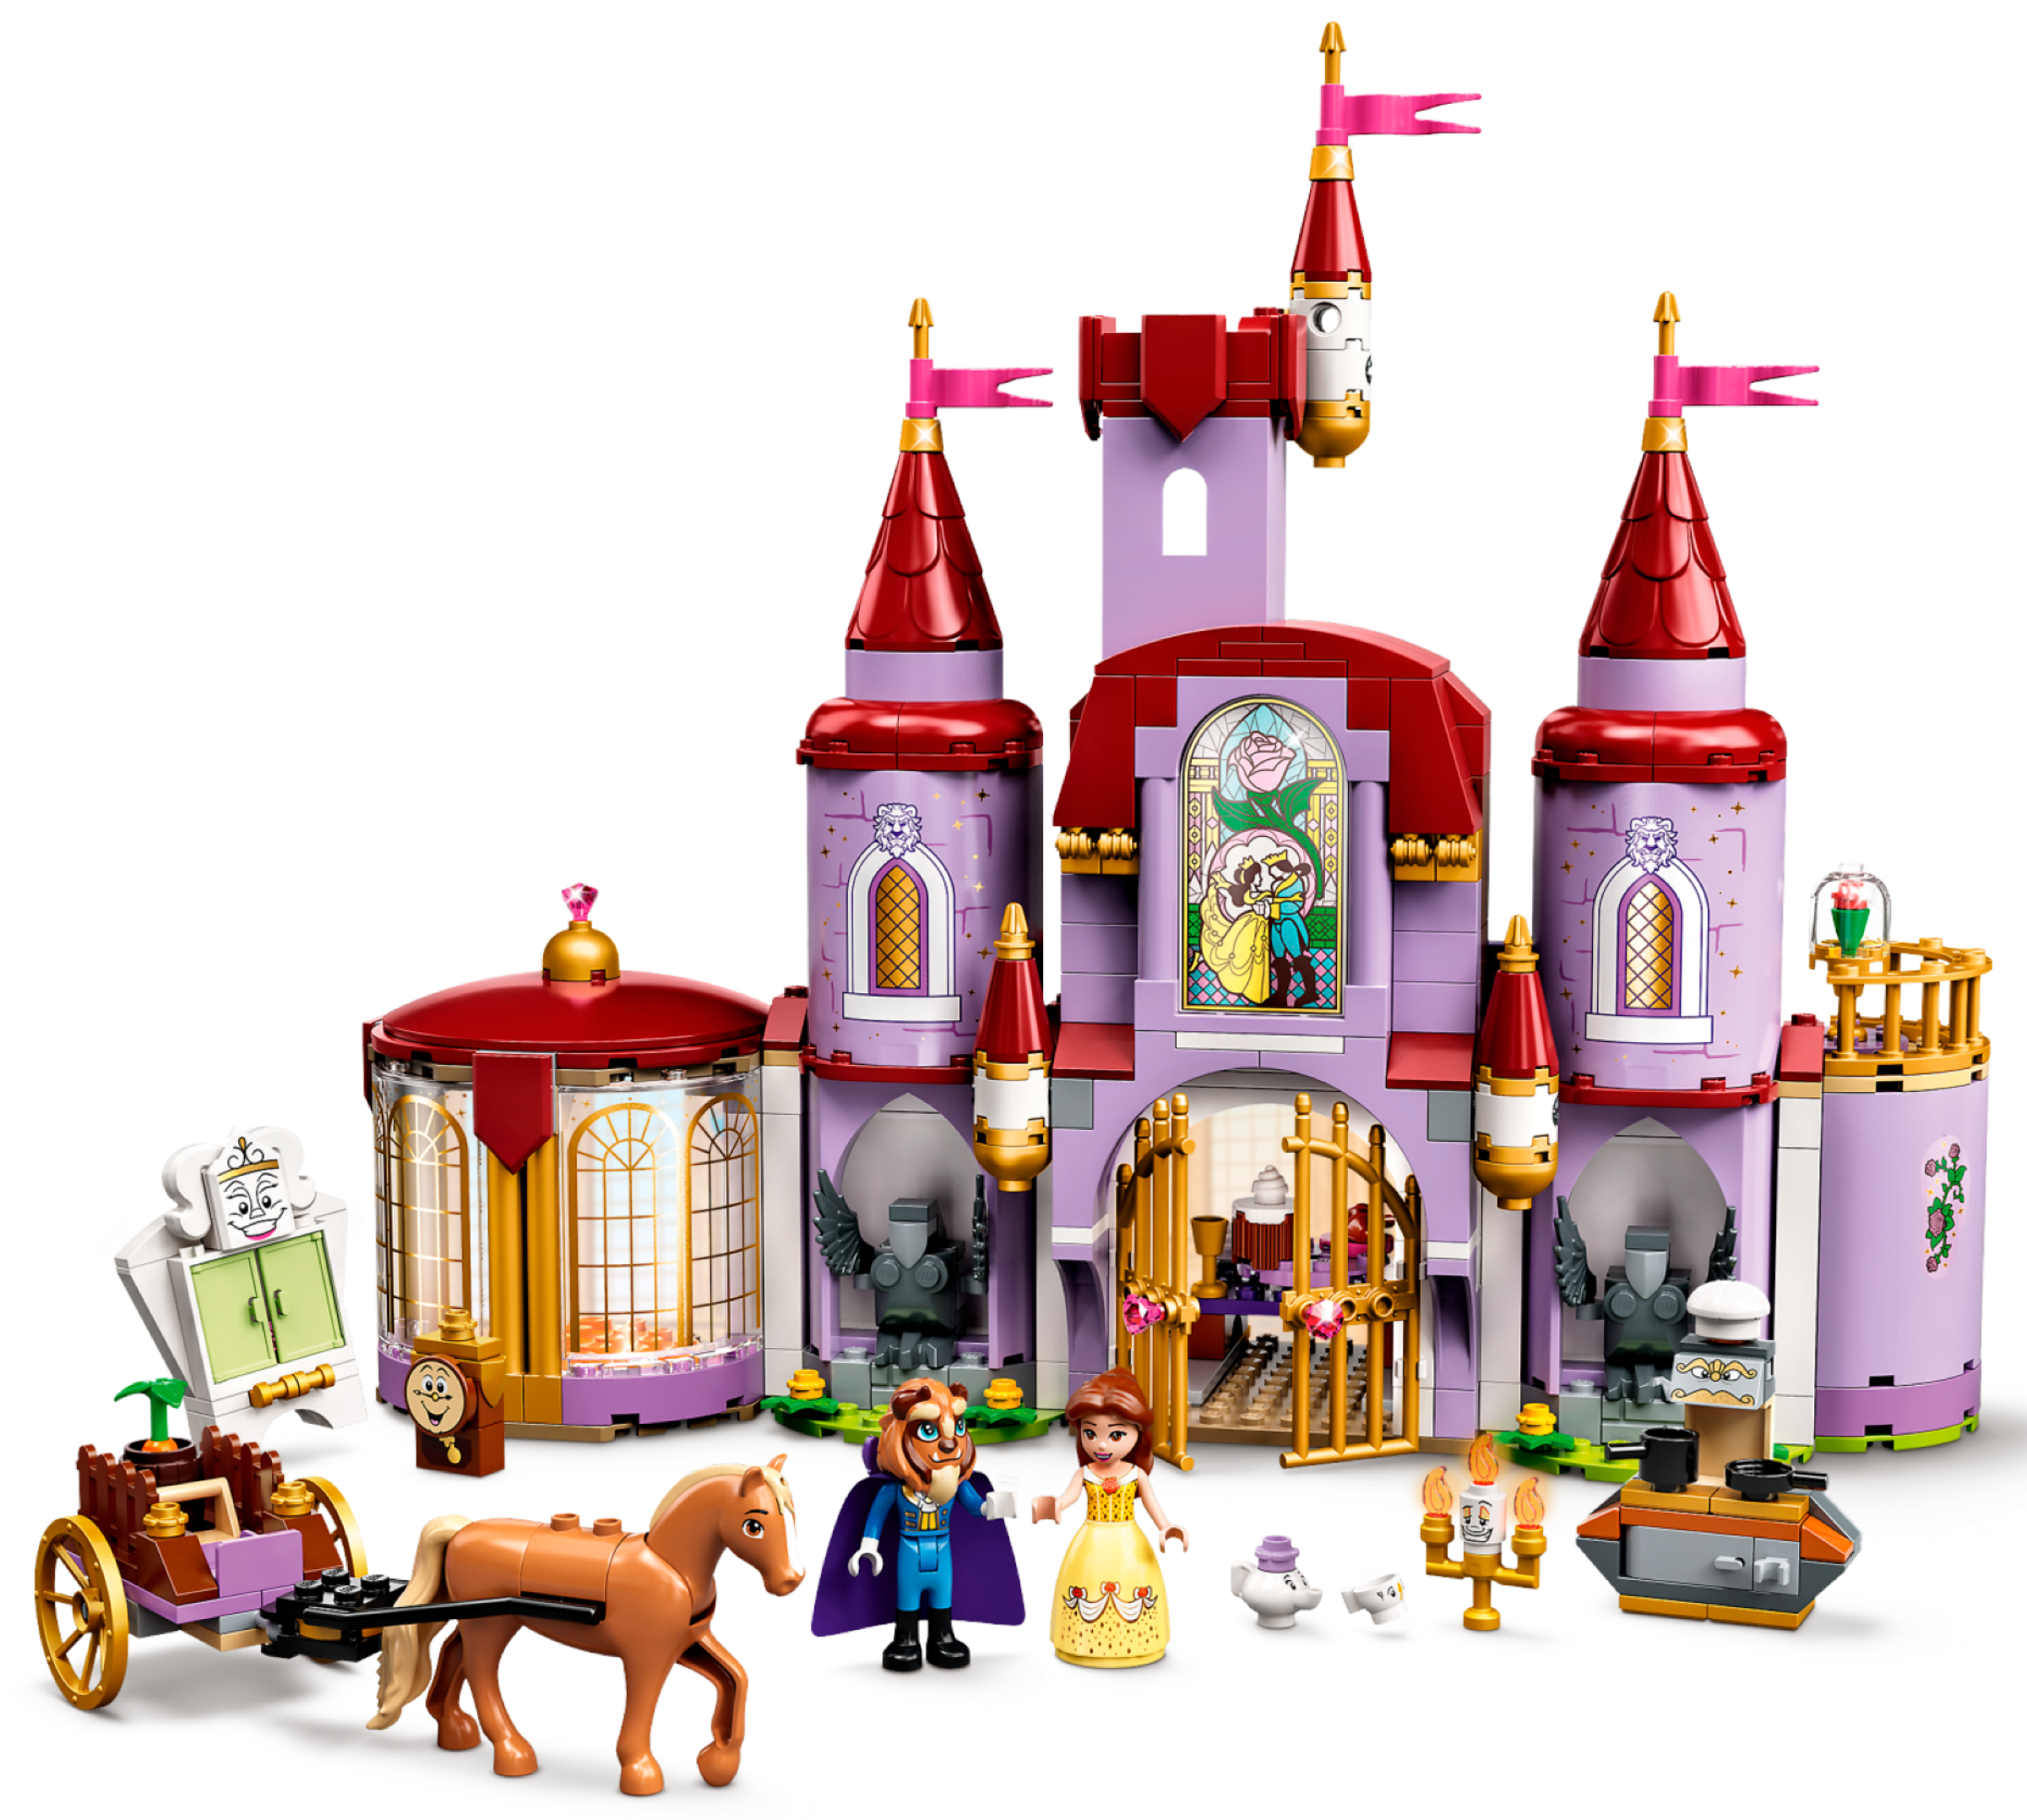 Beauty and The Beast Princess Castle Building Blocks Educational Kids Toys Gift